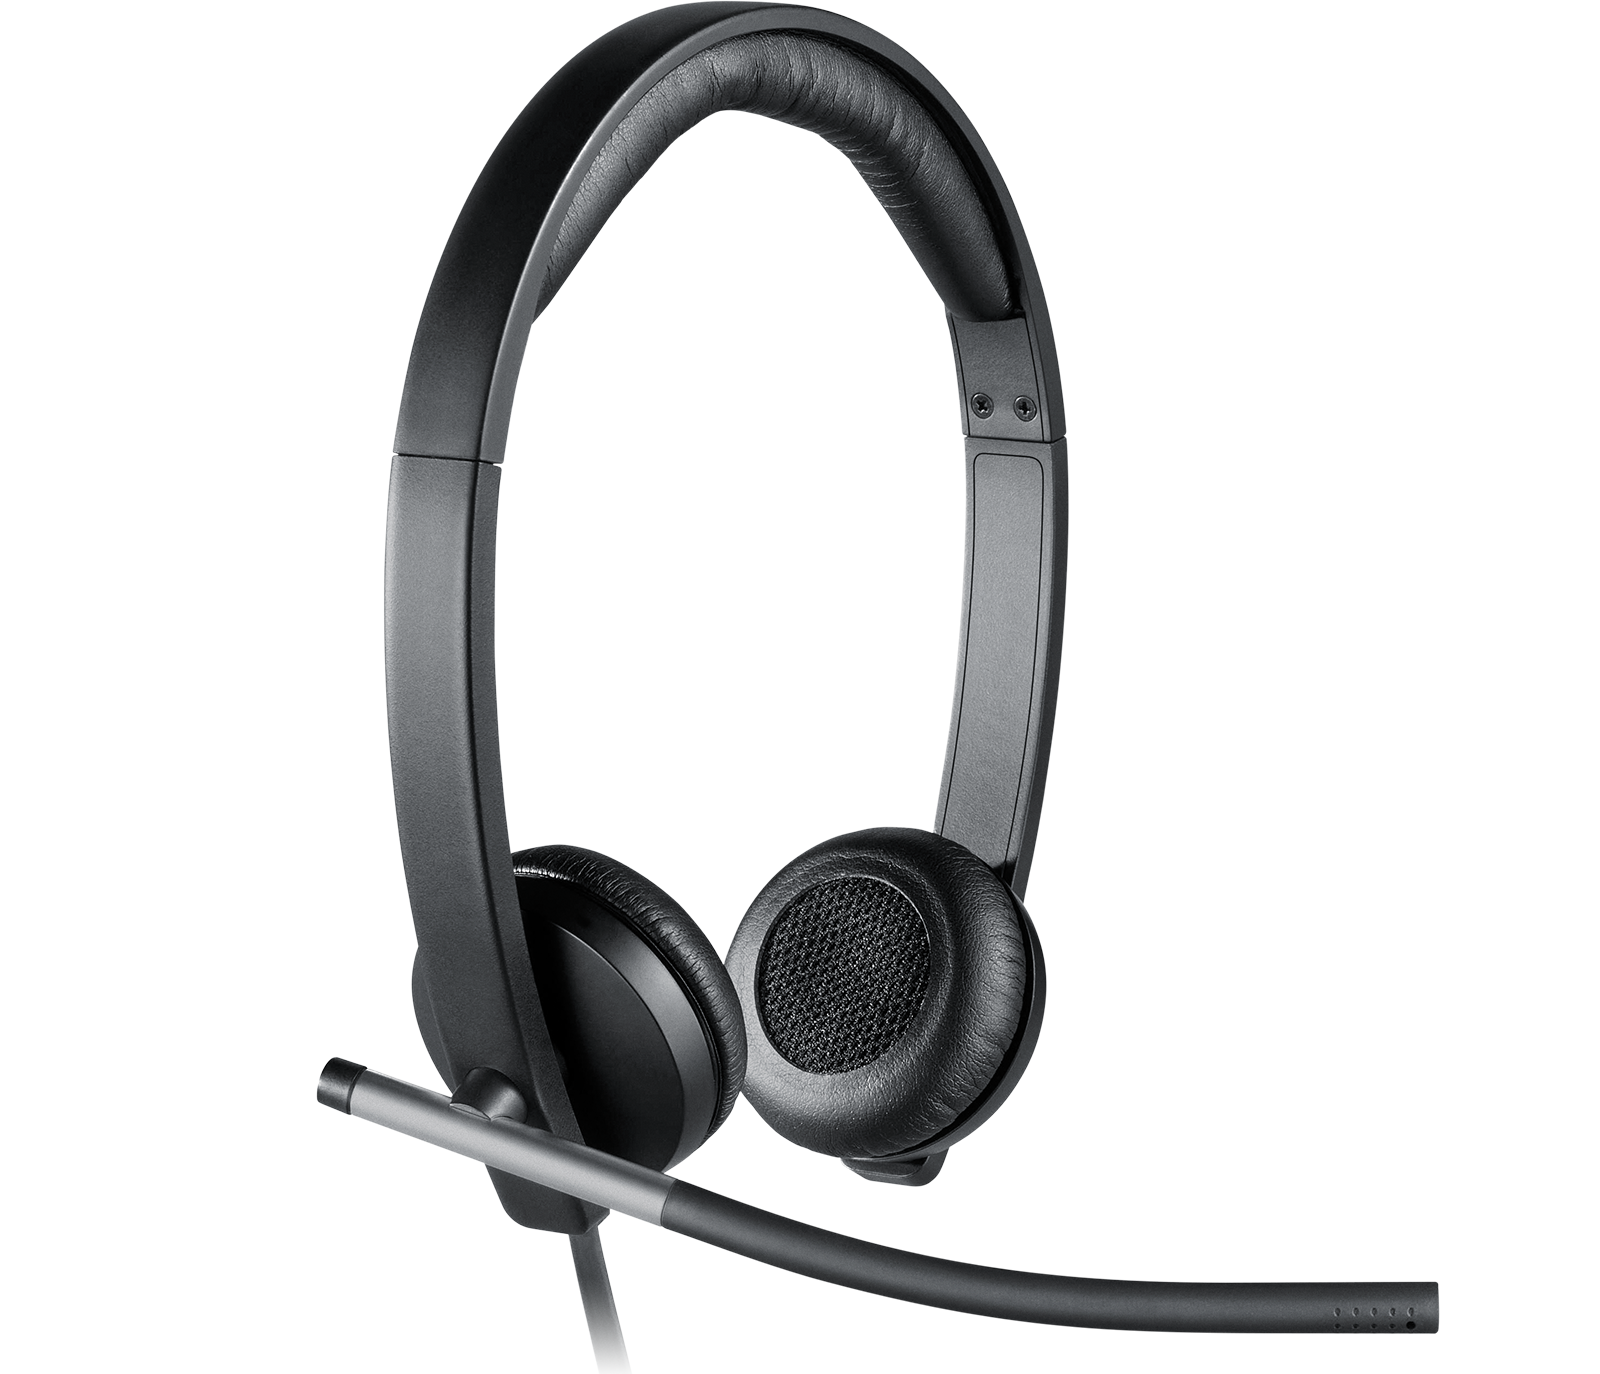 H650e Headset Stylish and sophisticated headset for pro-quality audio - Stereo